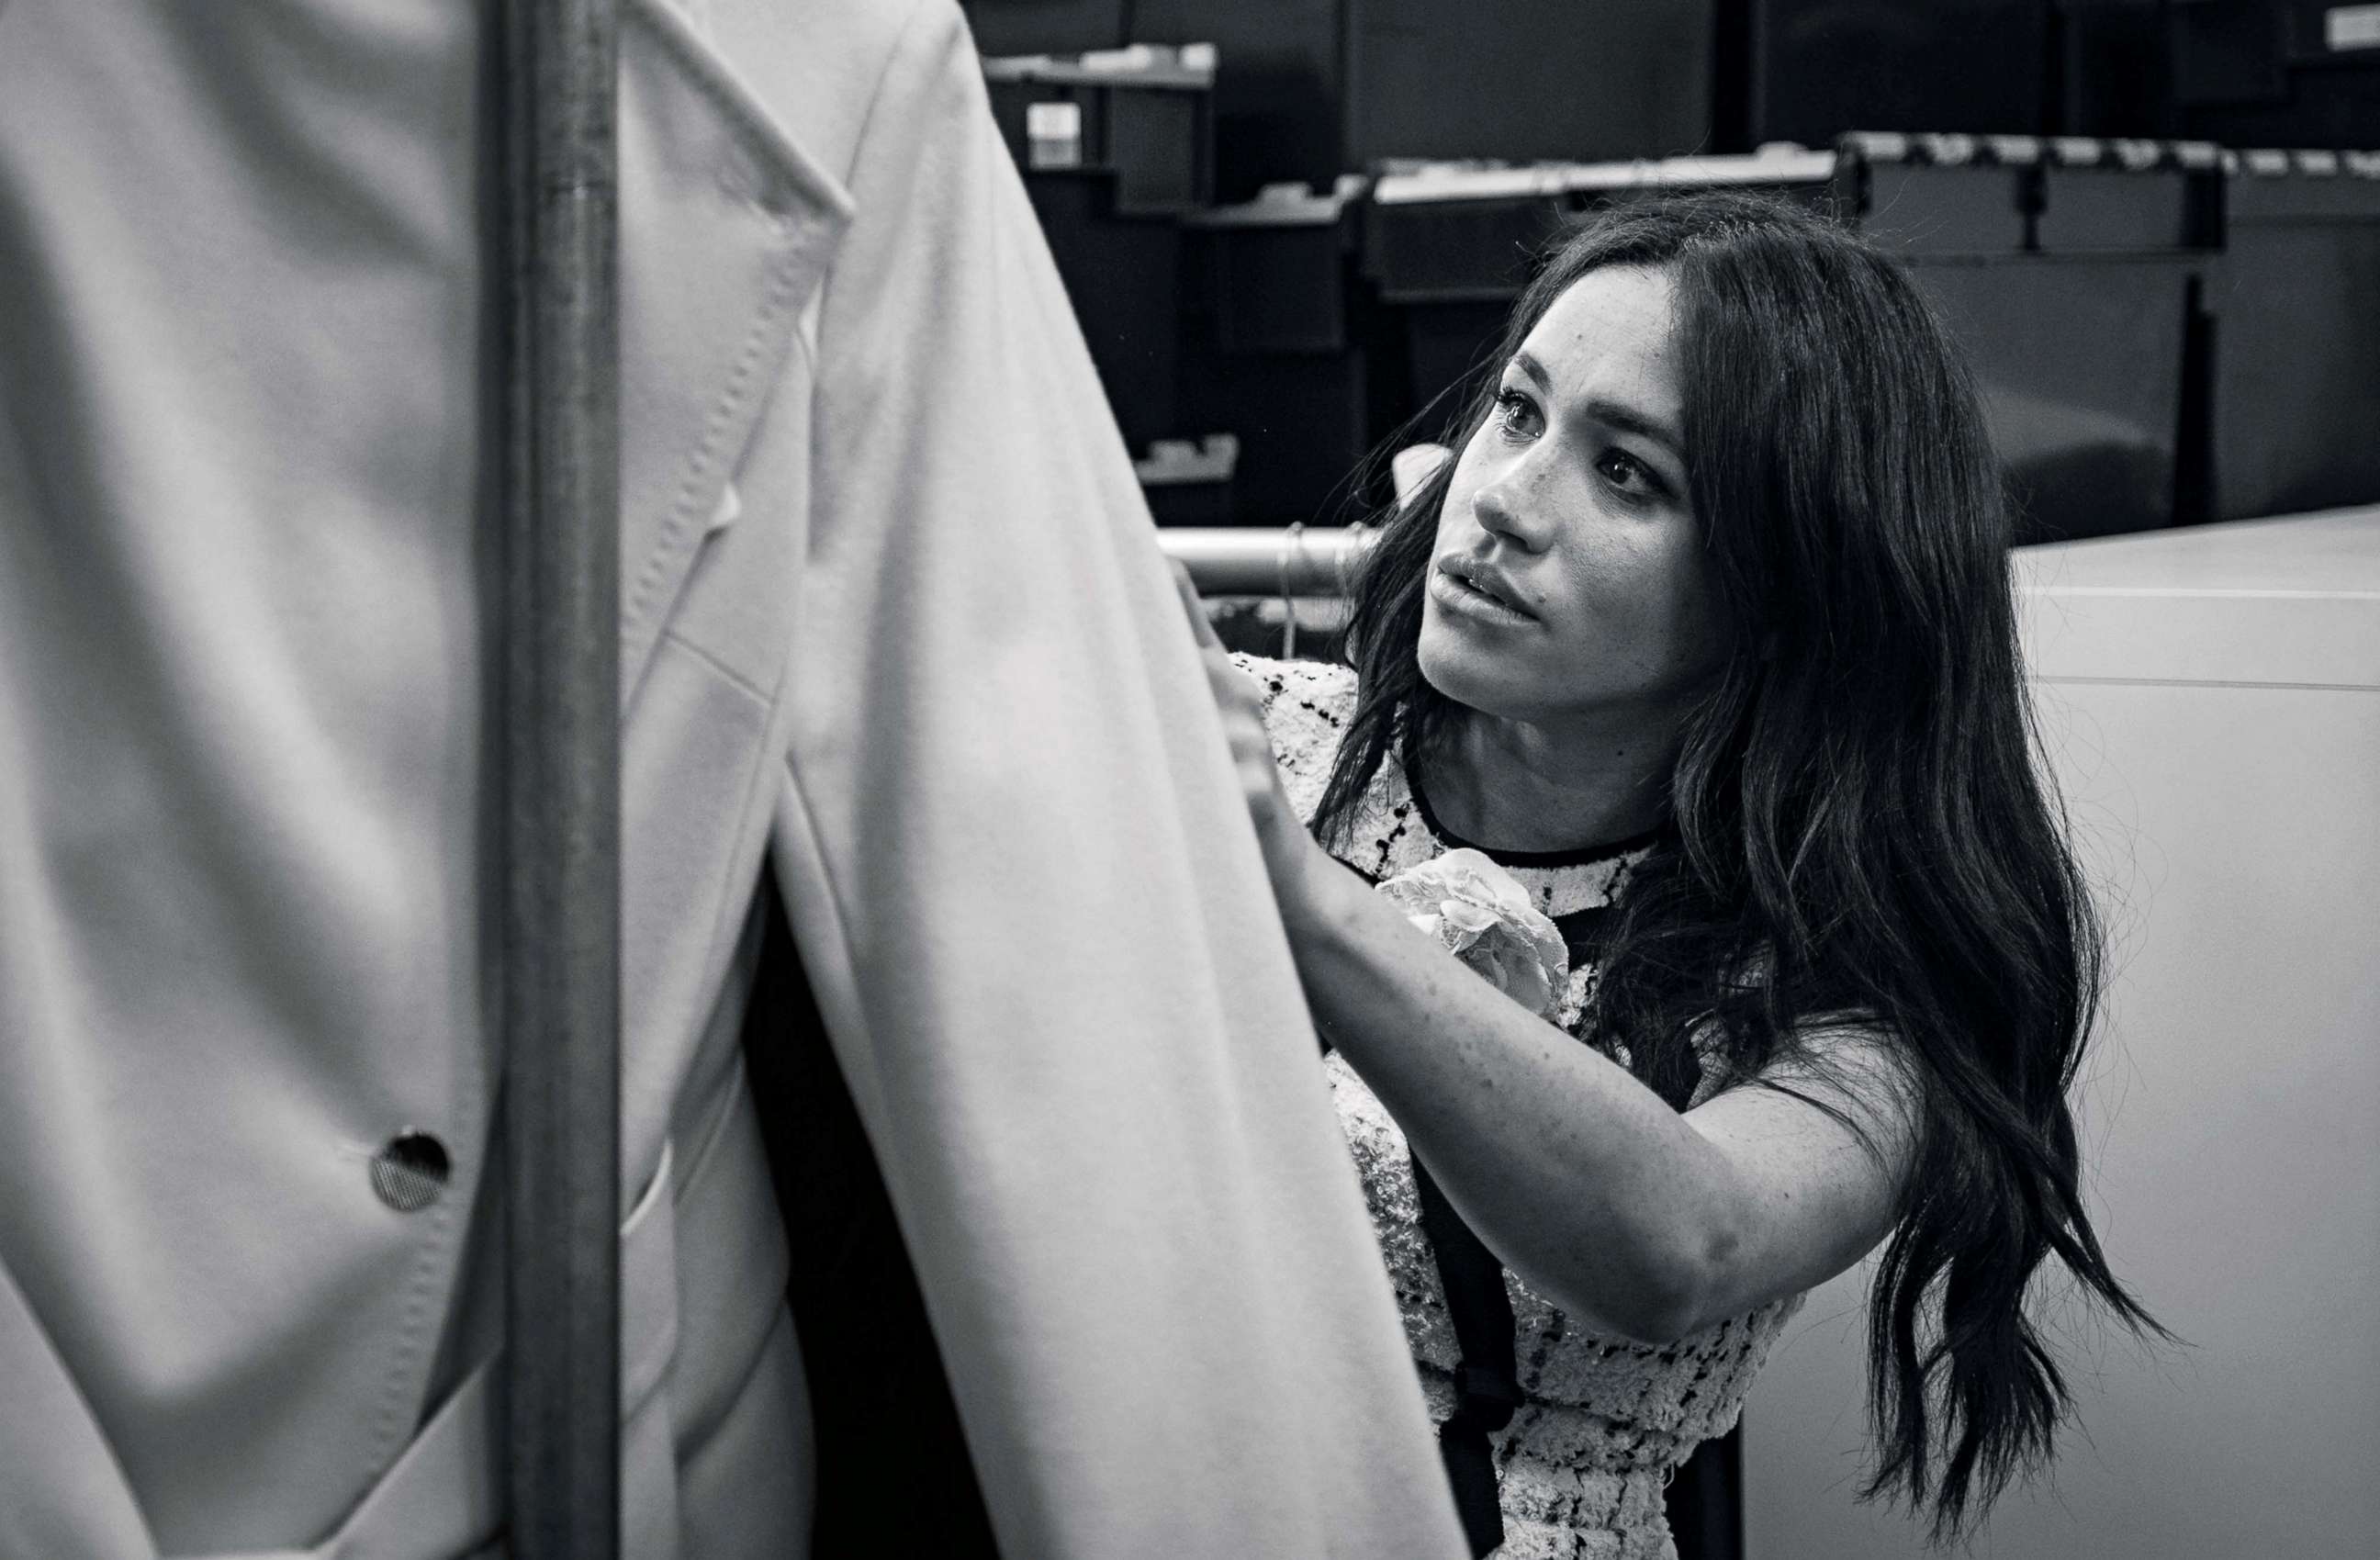 PHOTO: Meghan, Duchess of Sussex, patron of Smart Works, is pictured in the workroom of the Smart Works, London office in this undated handout image released by Kensington Palace, July 28, 2019.